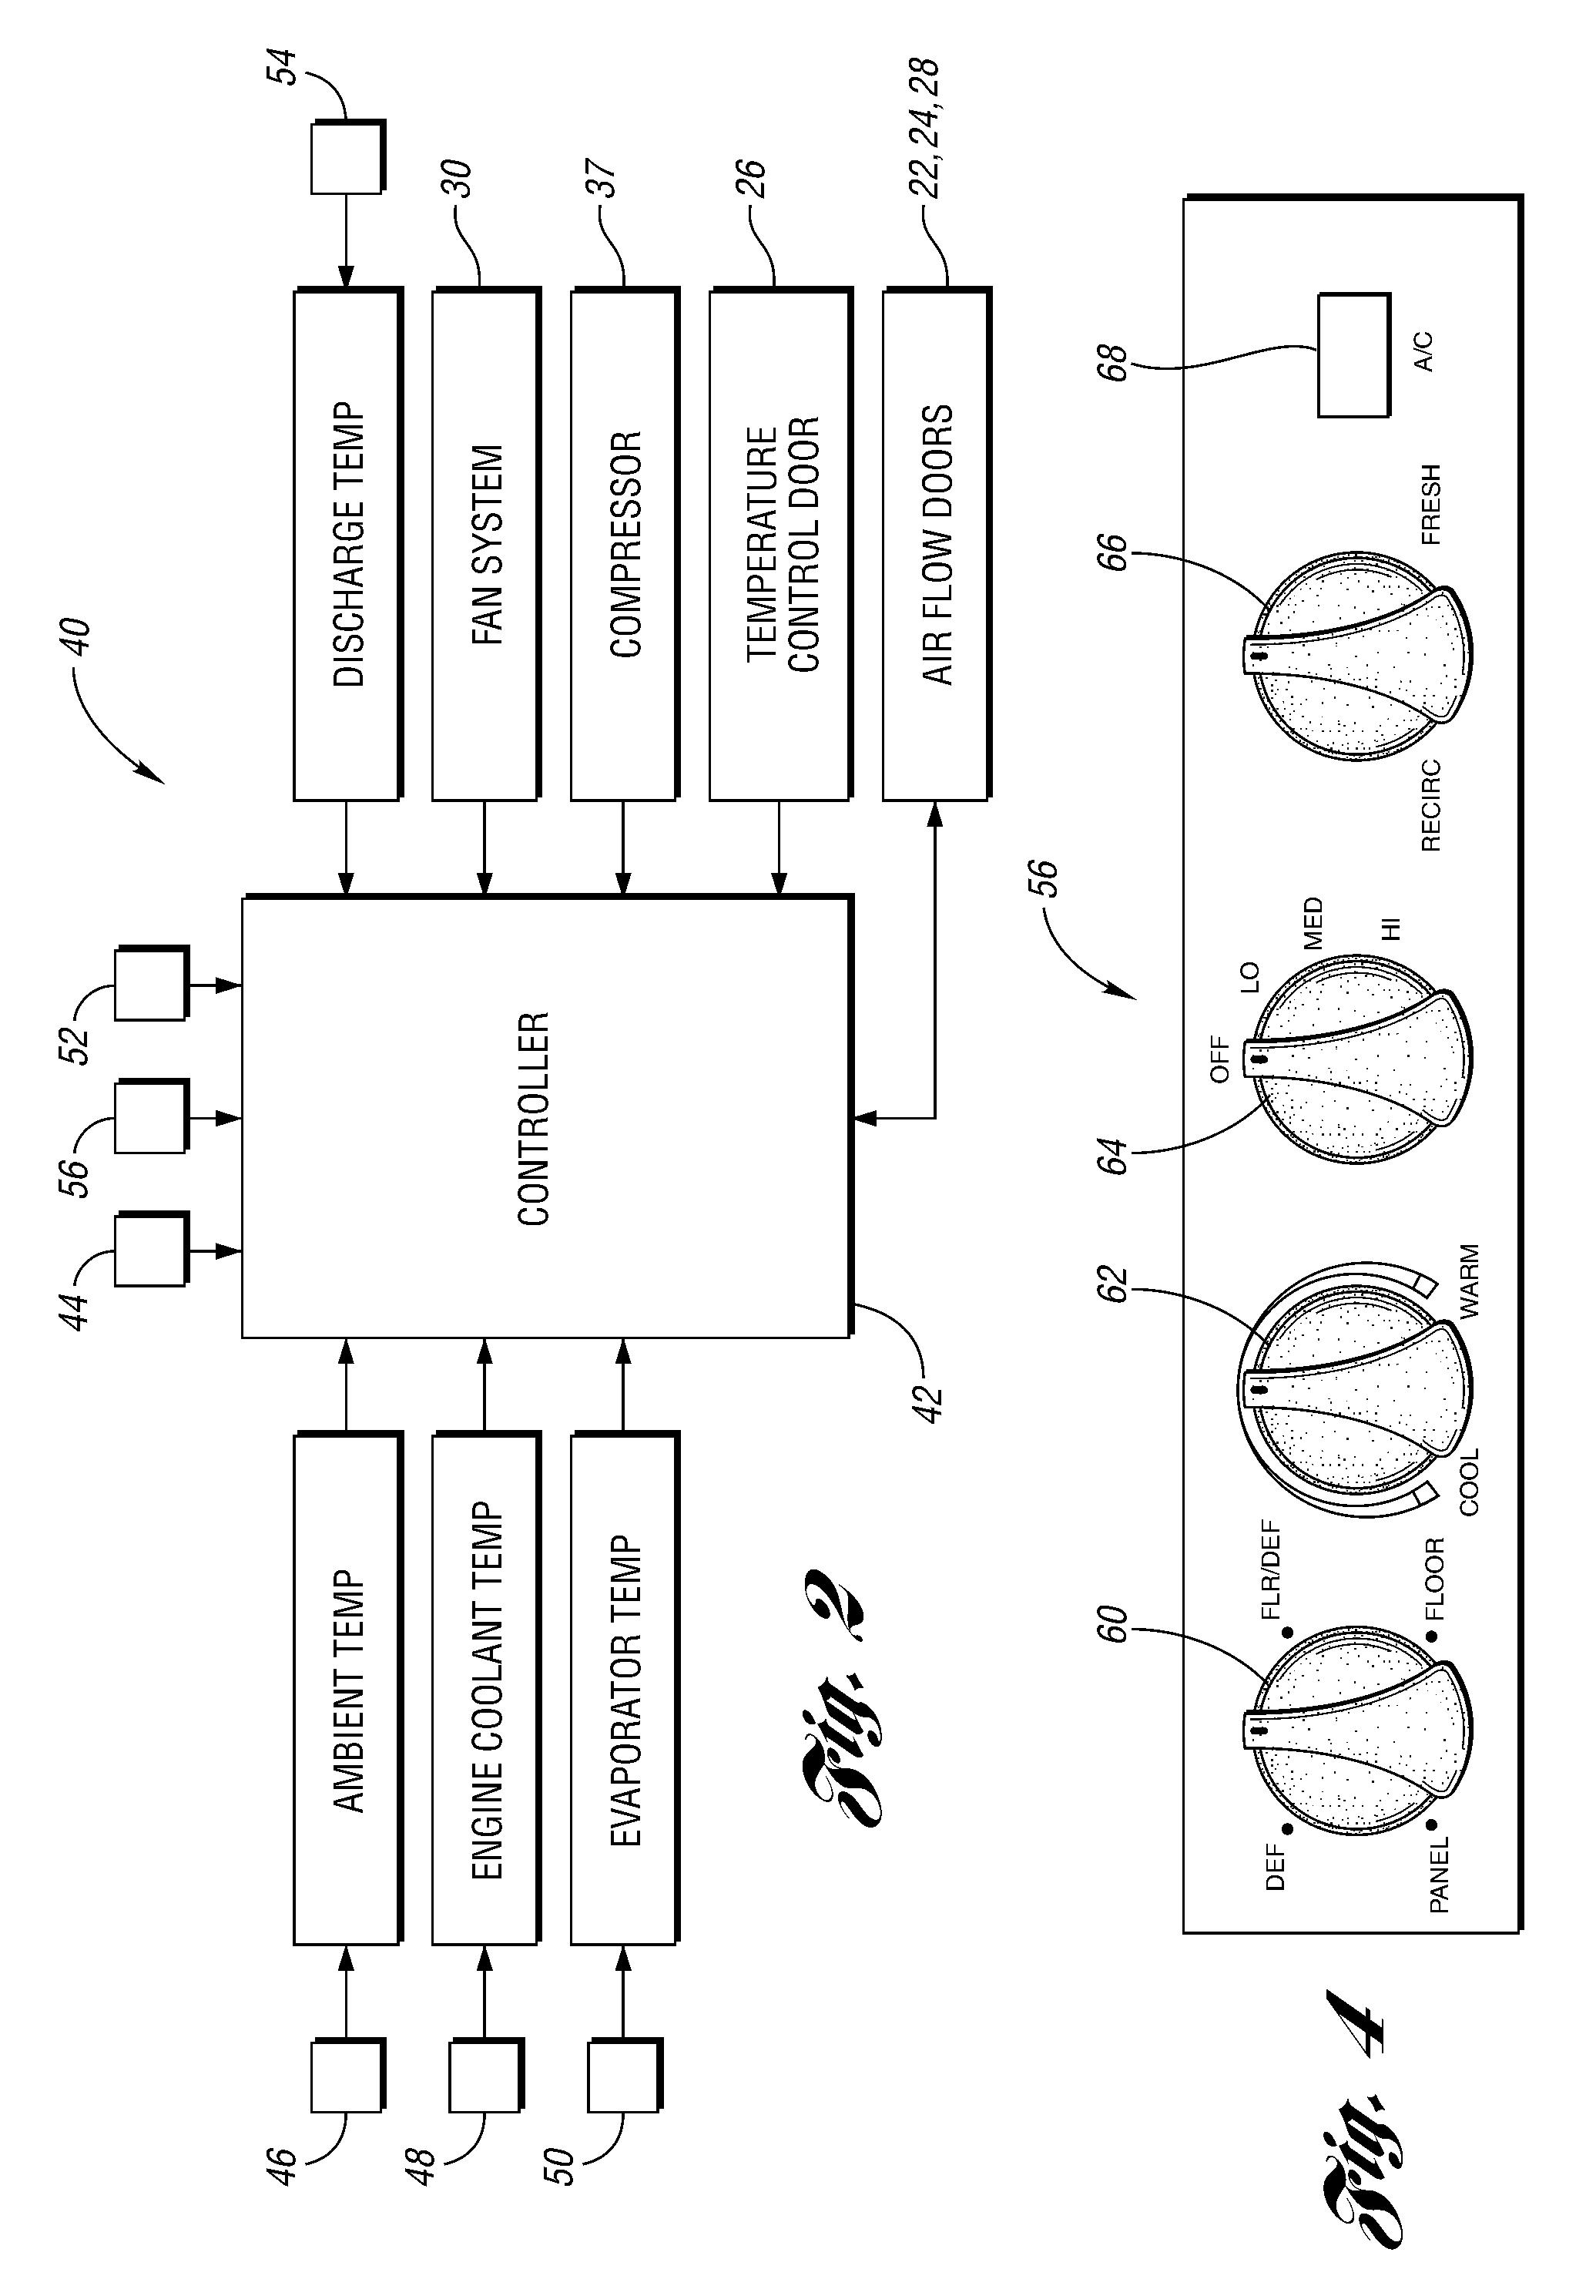 System and method for environmental management of a vehicle